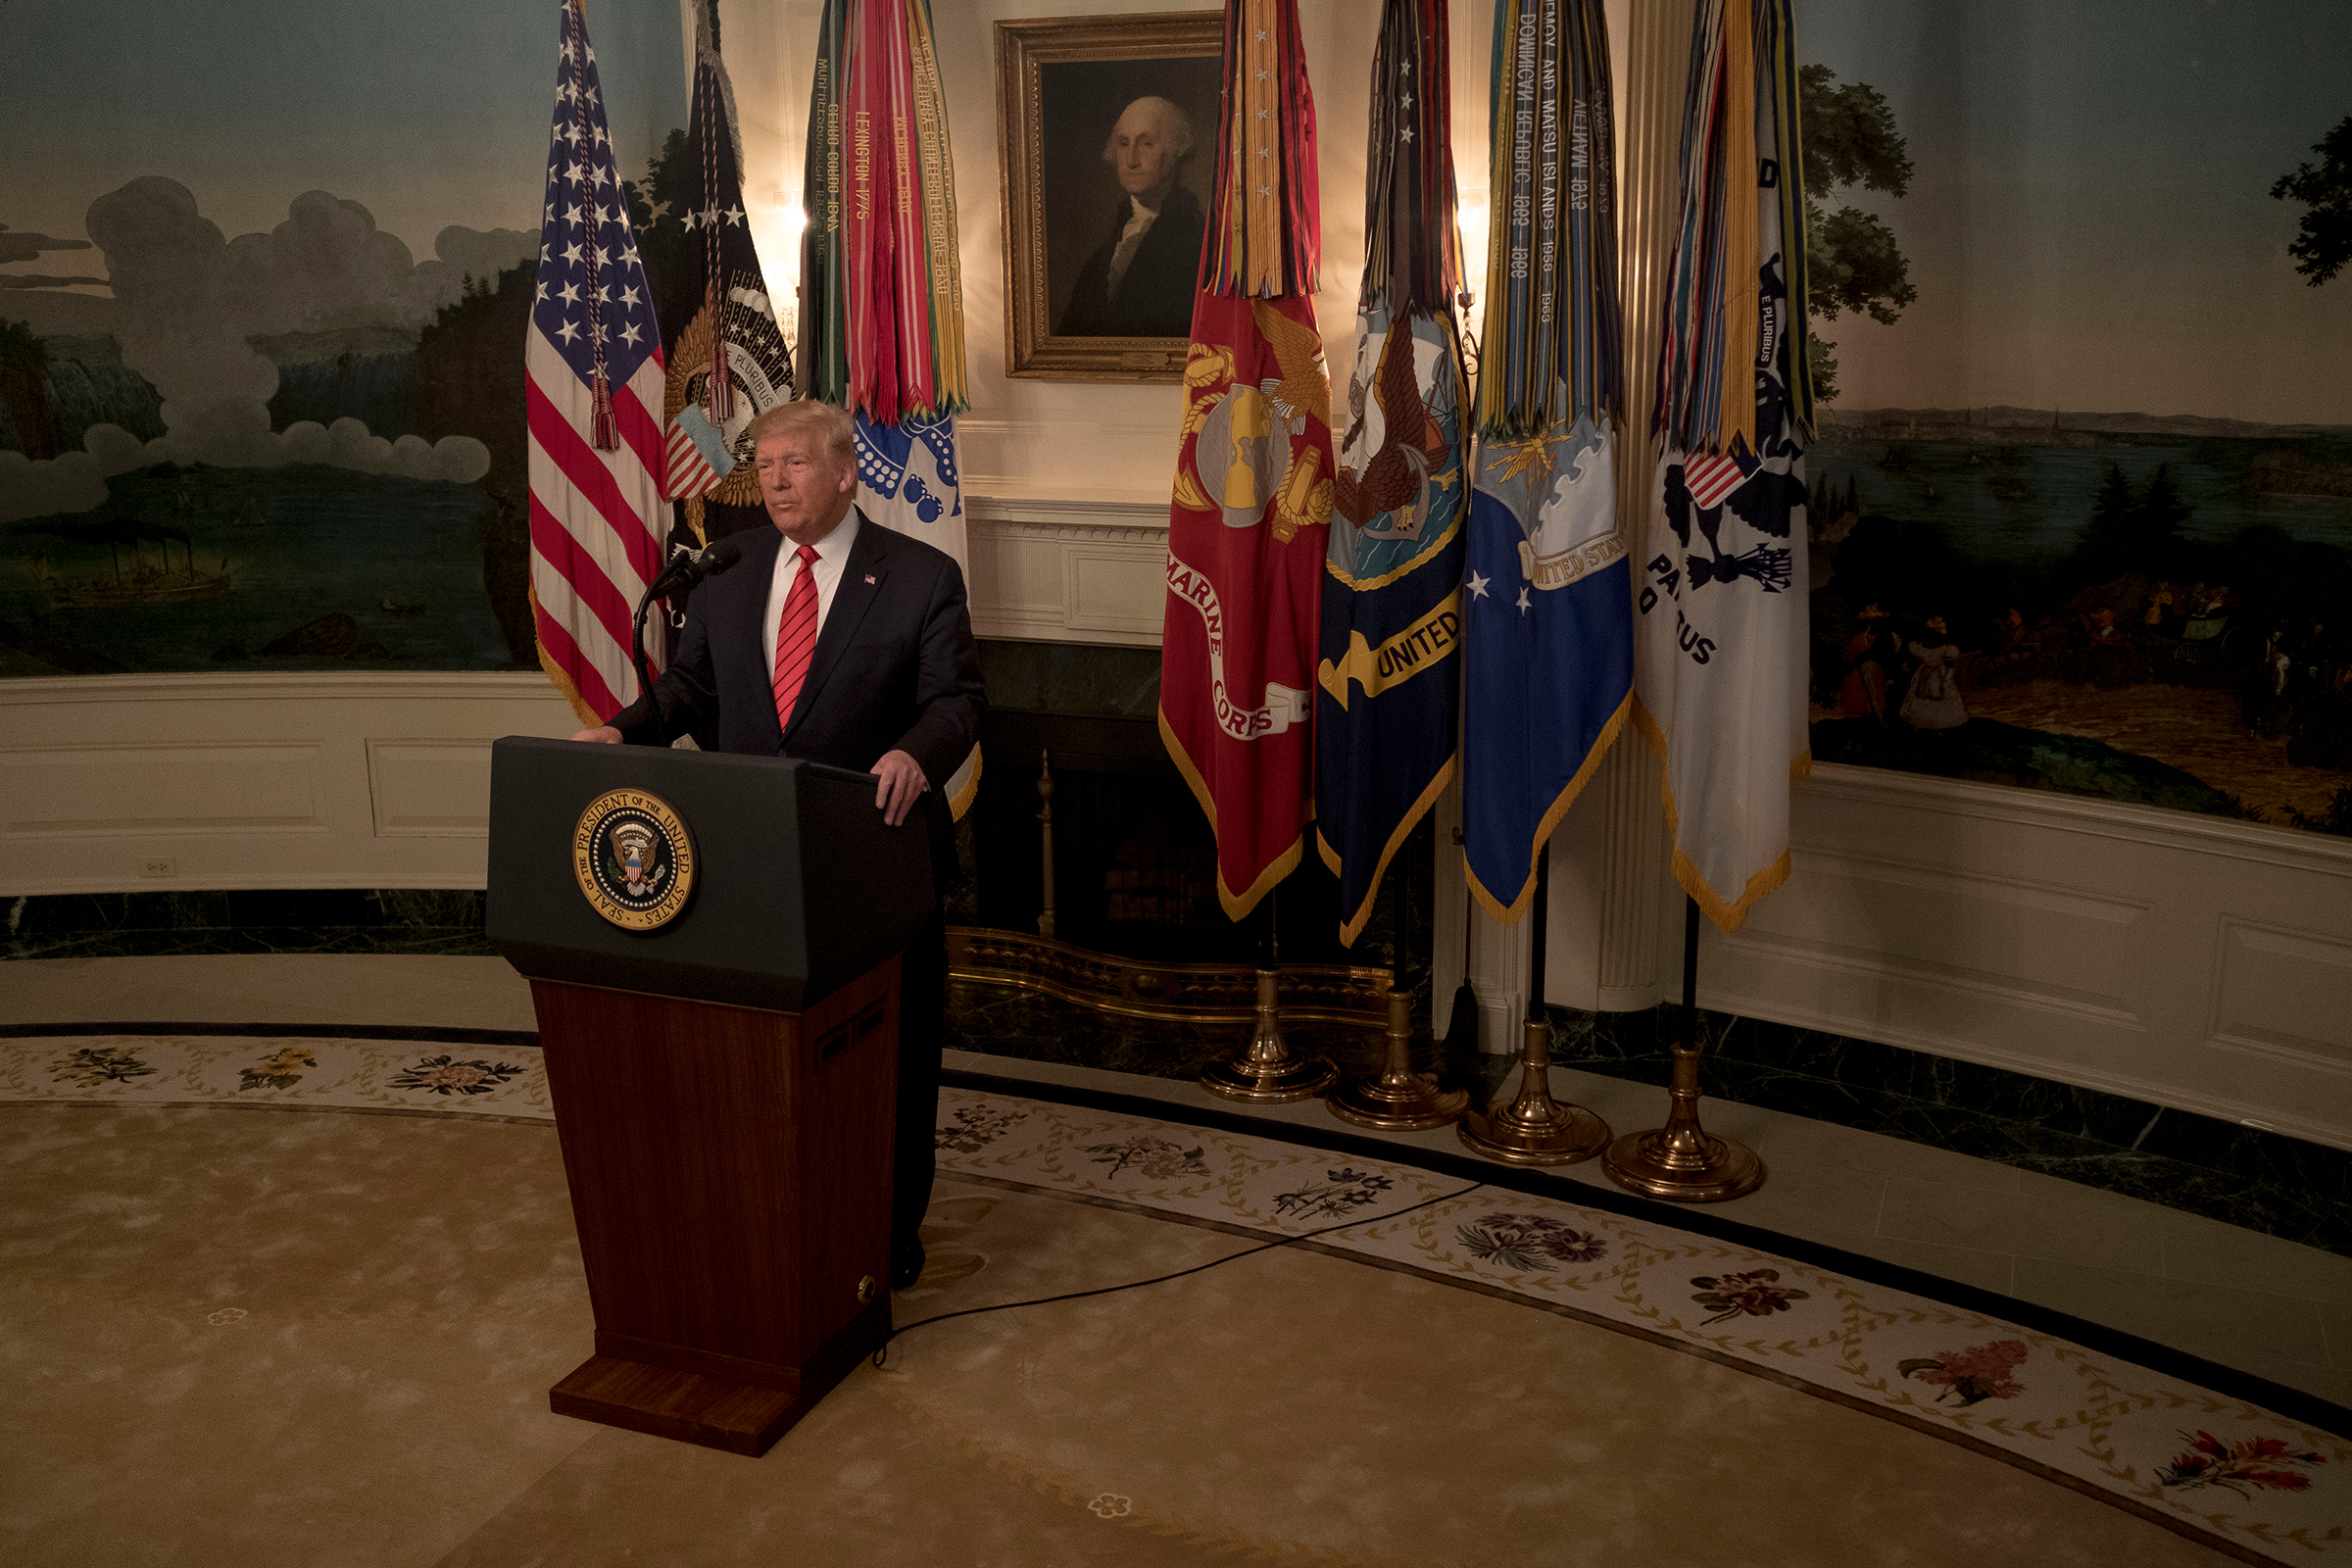 President Donald Trump announces the death of ISIS leader Abu Bakr al-Baghdadi, in a raid by American special operations forces in Syria, at the White House on Oct. 27, 2019. (Gabriella Demczuk for TIME)